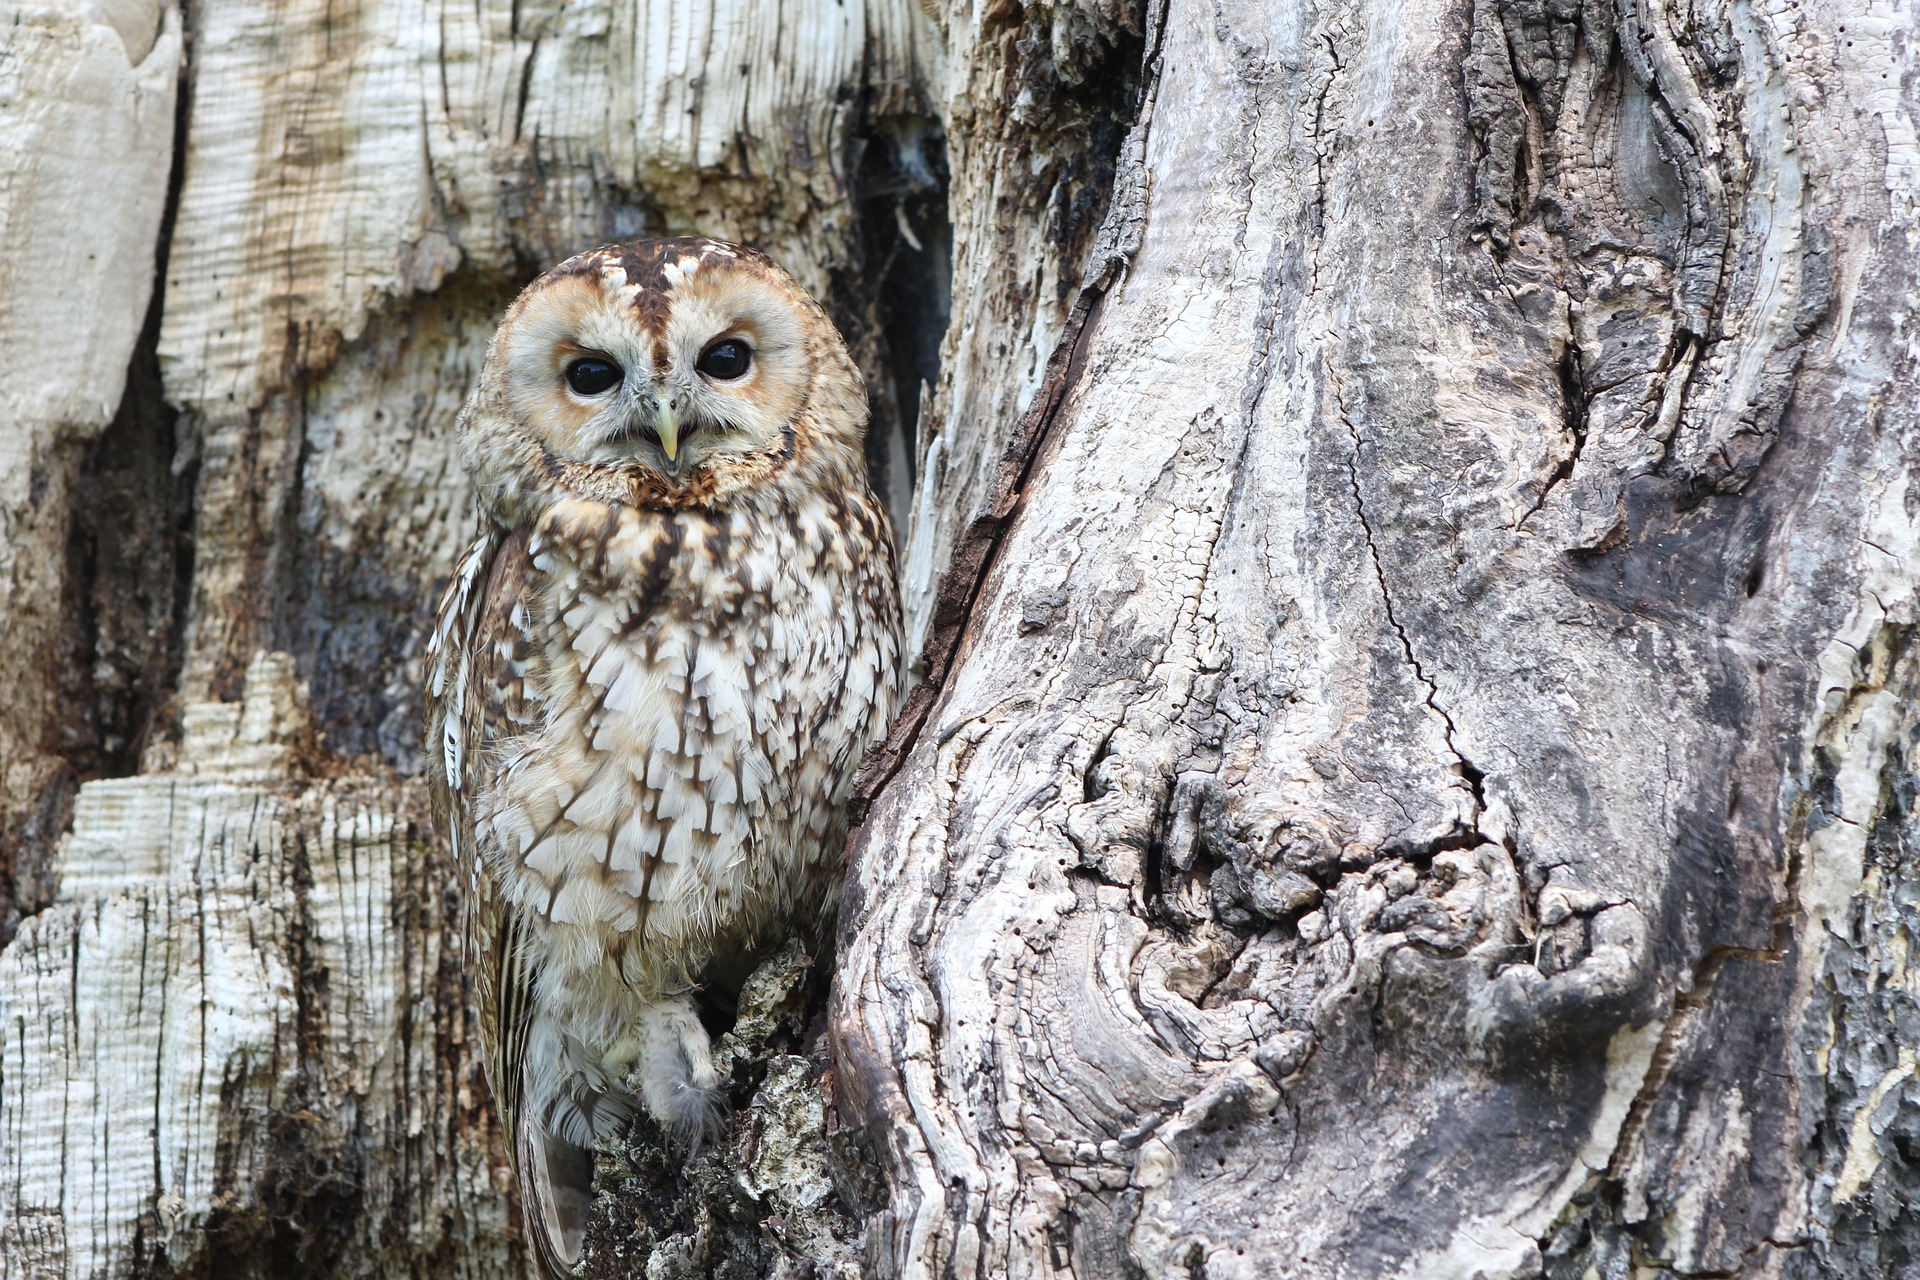 North Line OWL (owl in tree pictured)